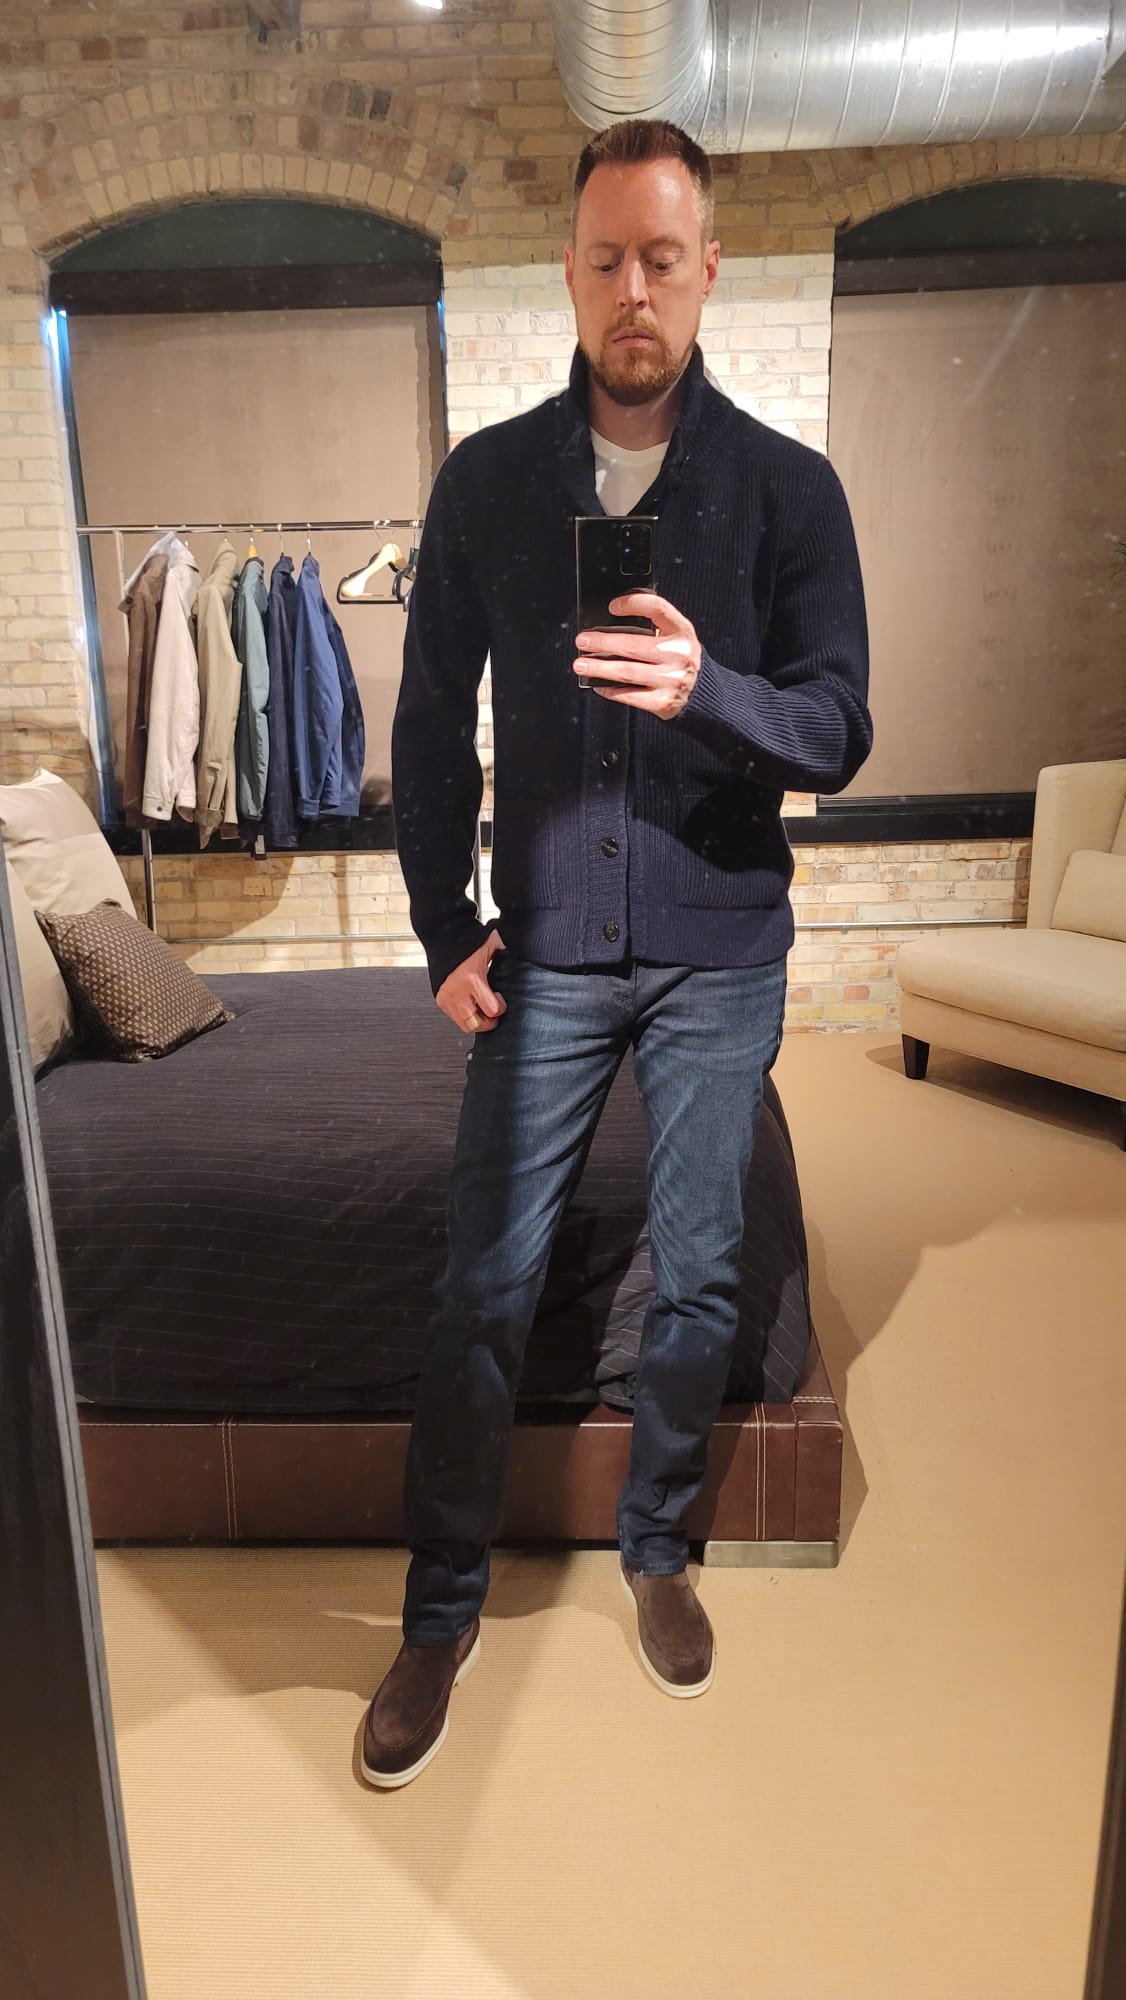 Style experts answer how can jeans be business casual